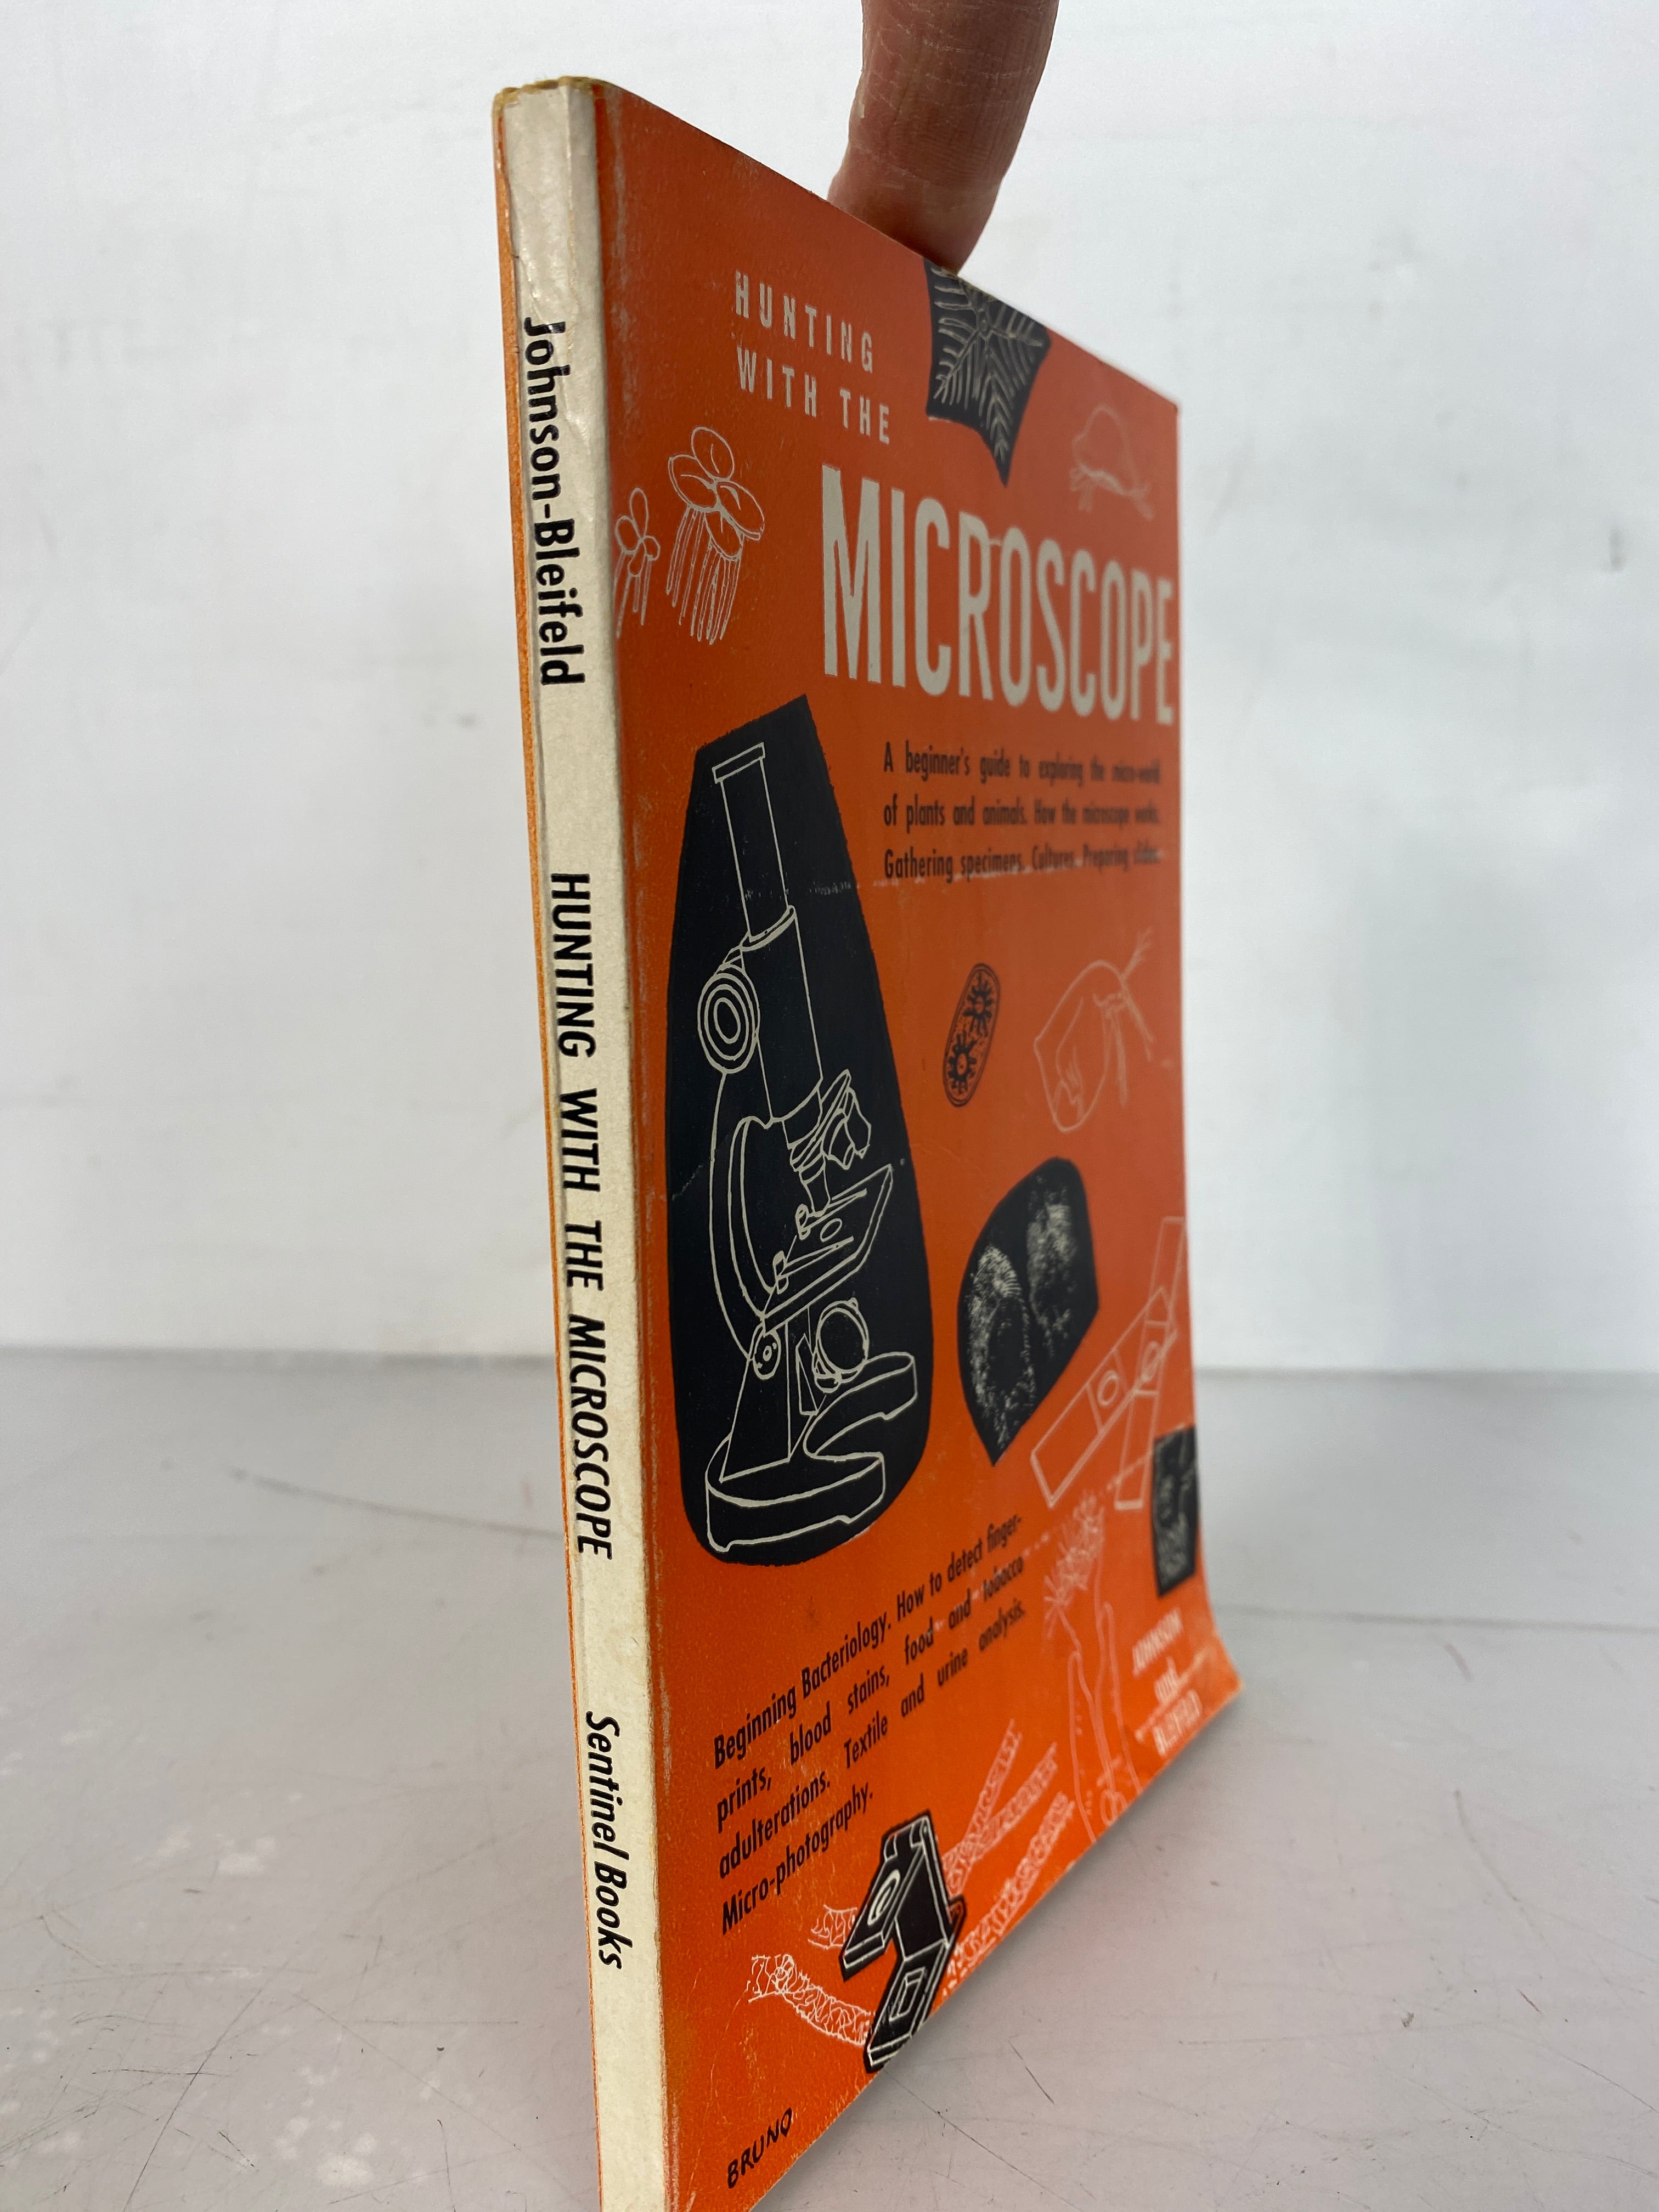 Hunting With the Microscope by Johnson and Bleifeld 1956 SC